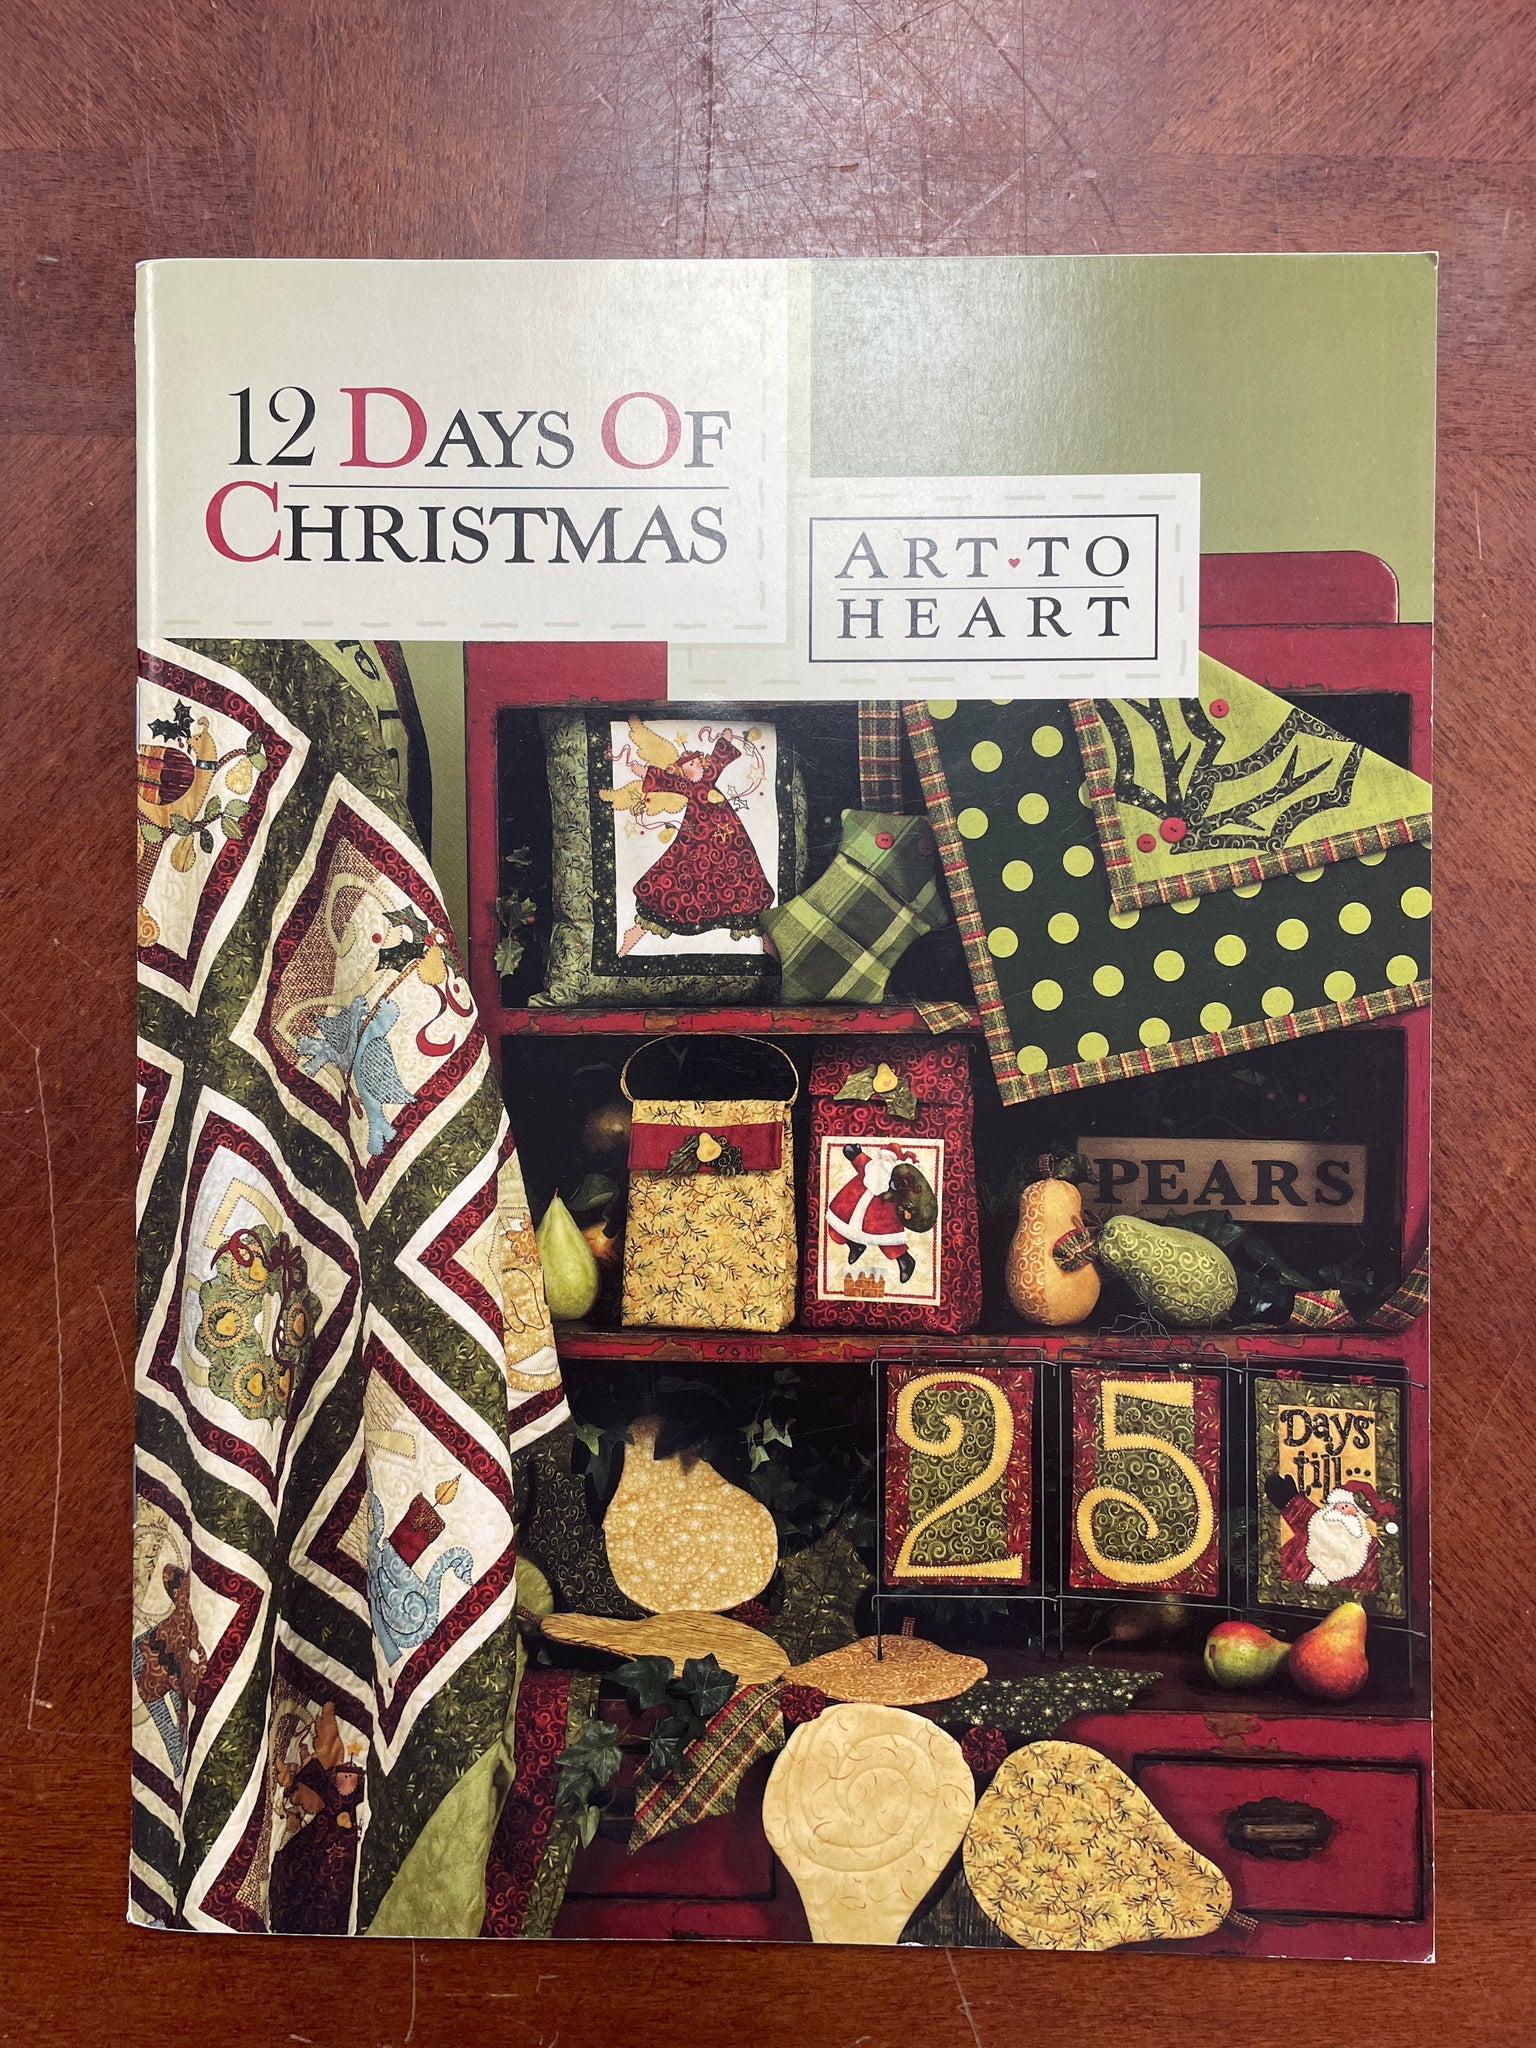 2008 Quilted Appliqué Pattern Book - "12 Days of Christmas"